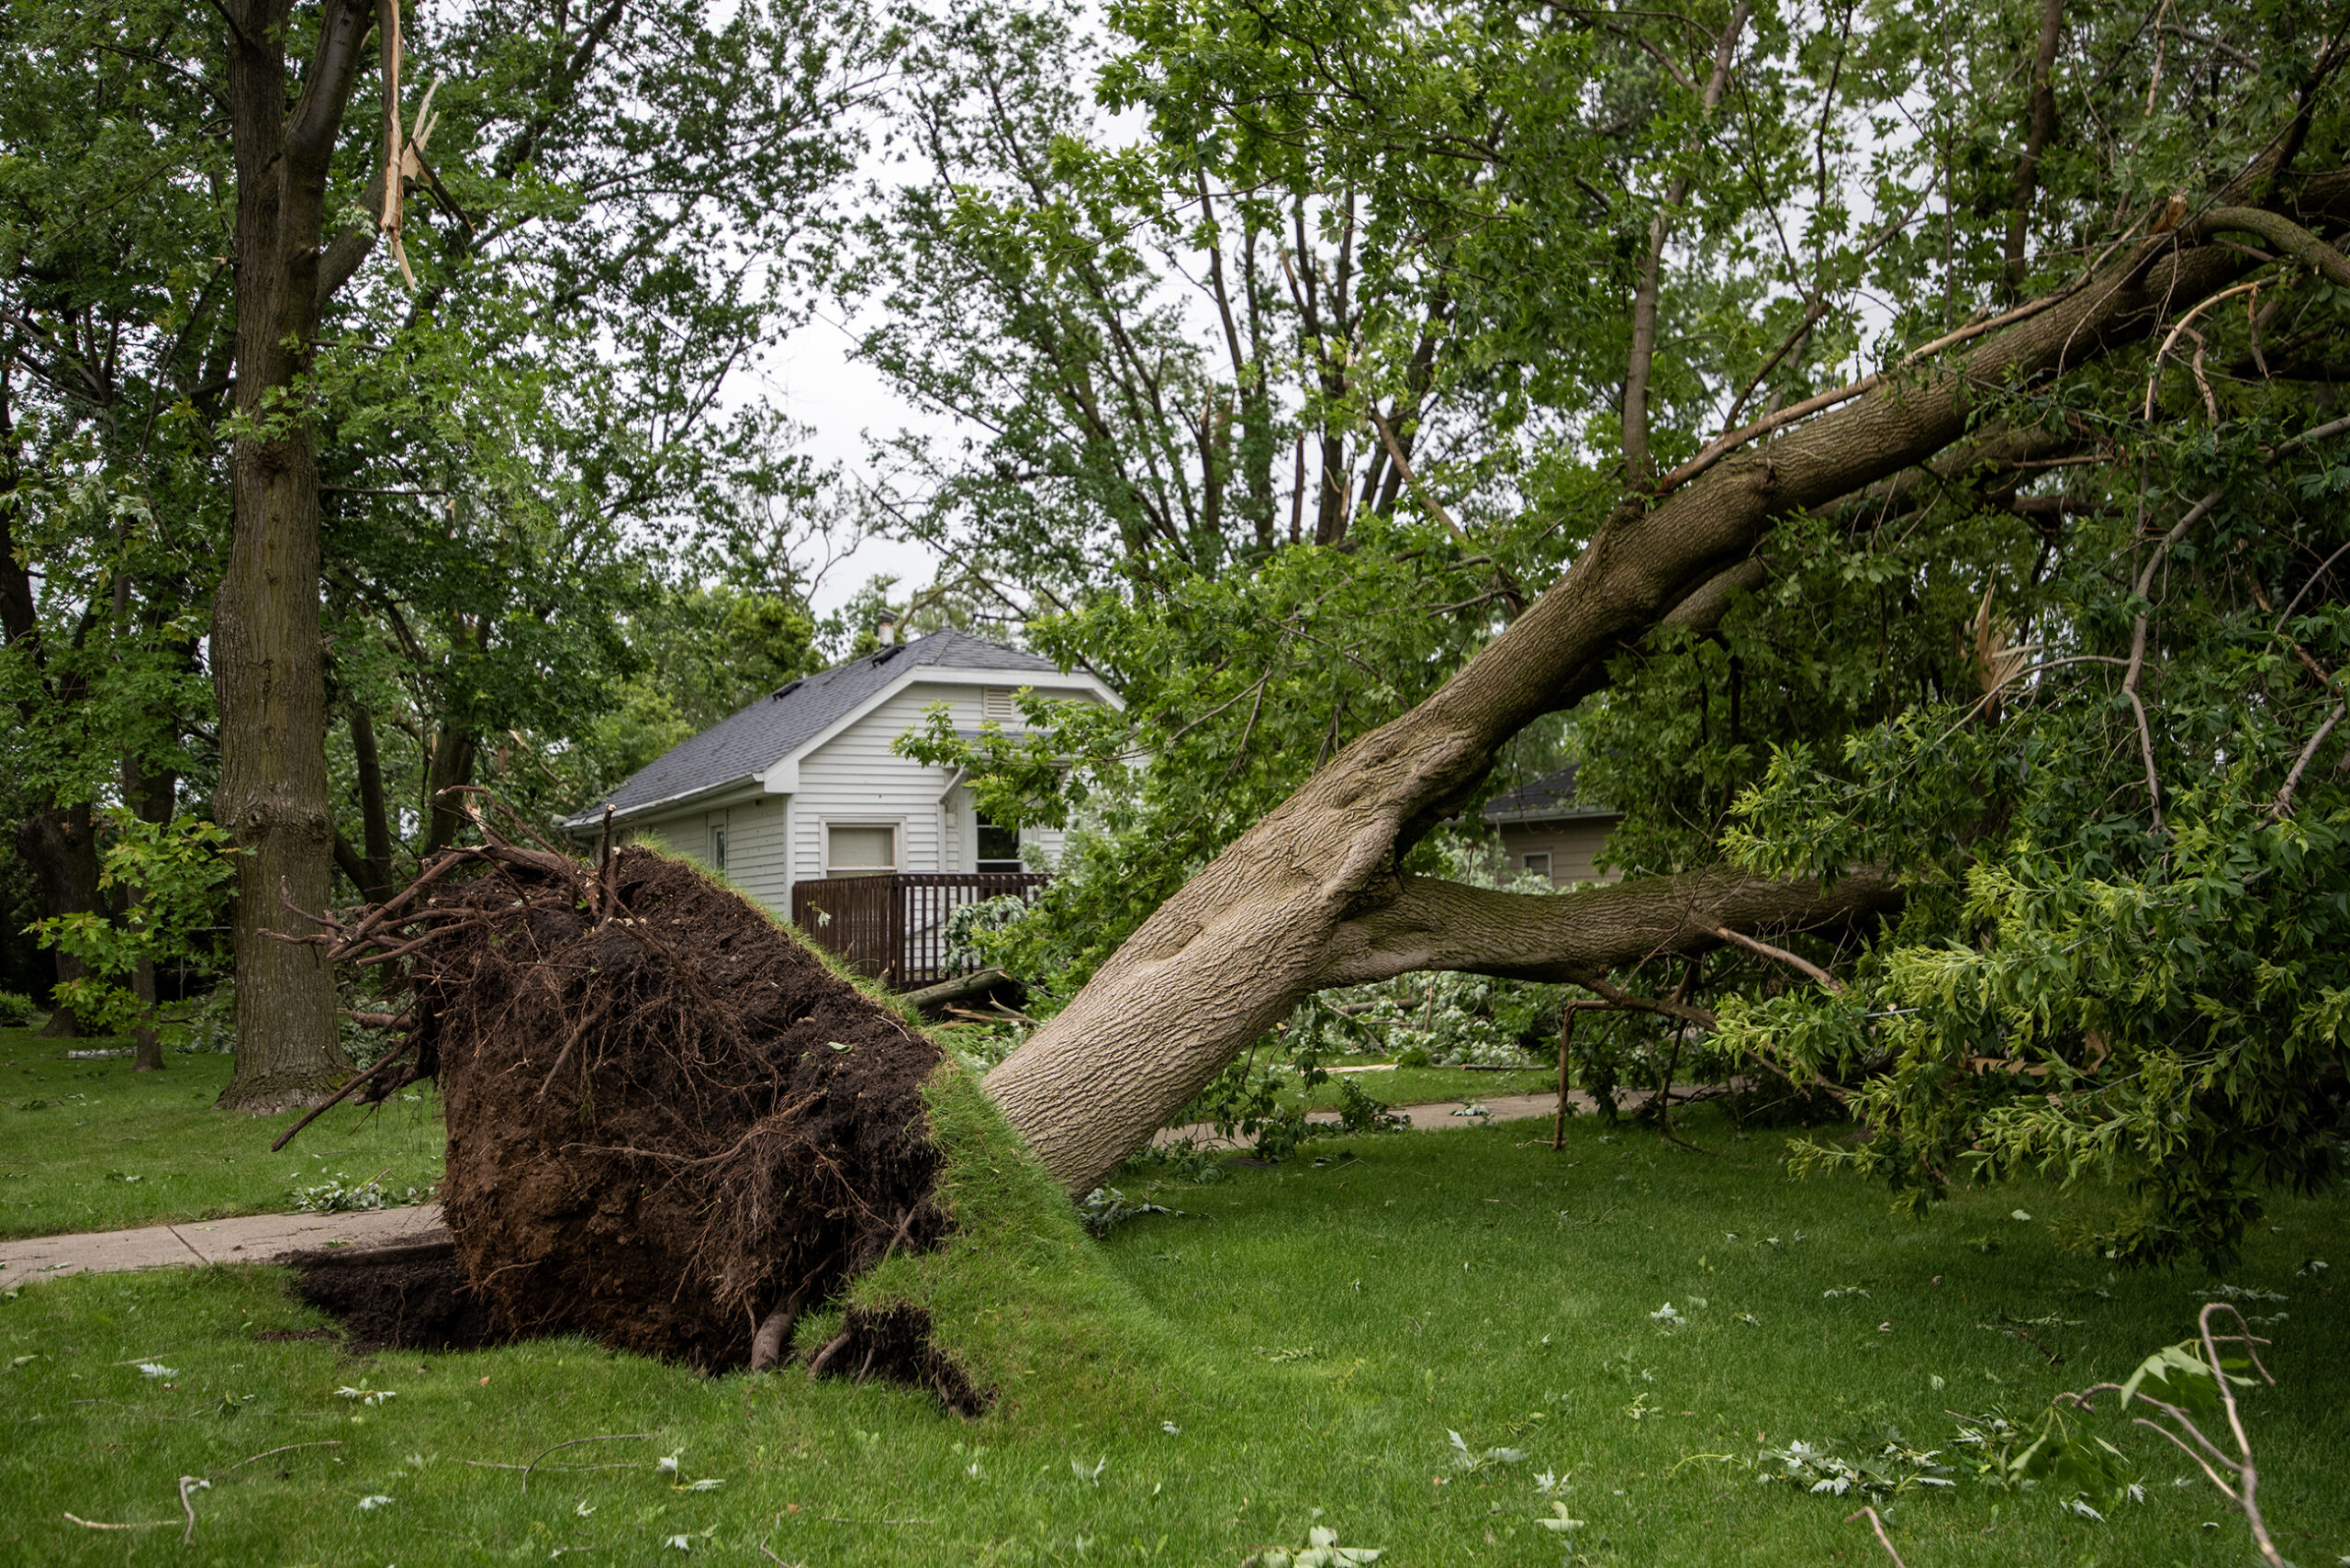 A large tree is on its side in front of a house. Roots can bee seen underneath.